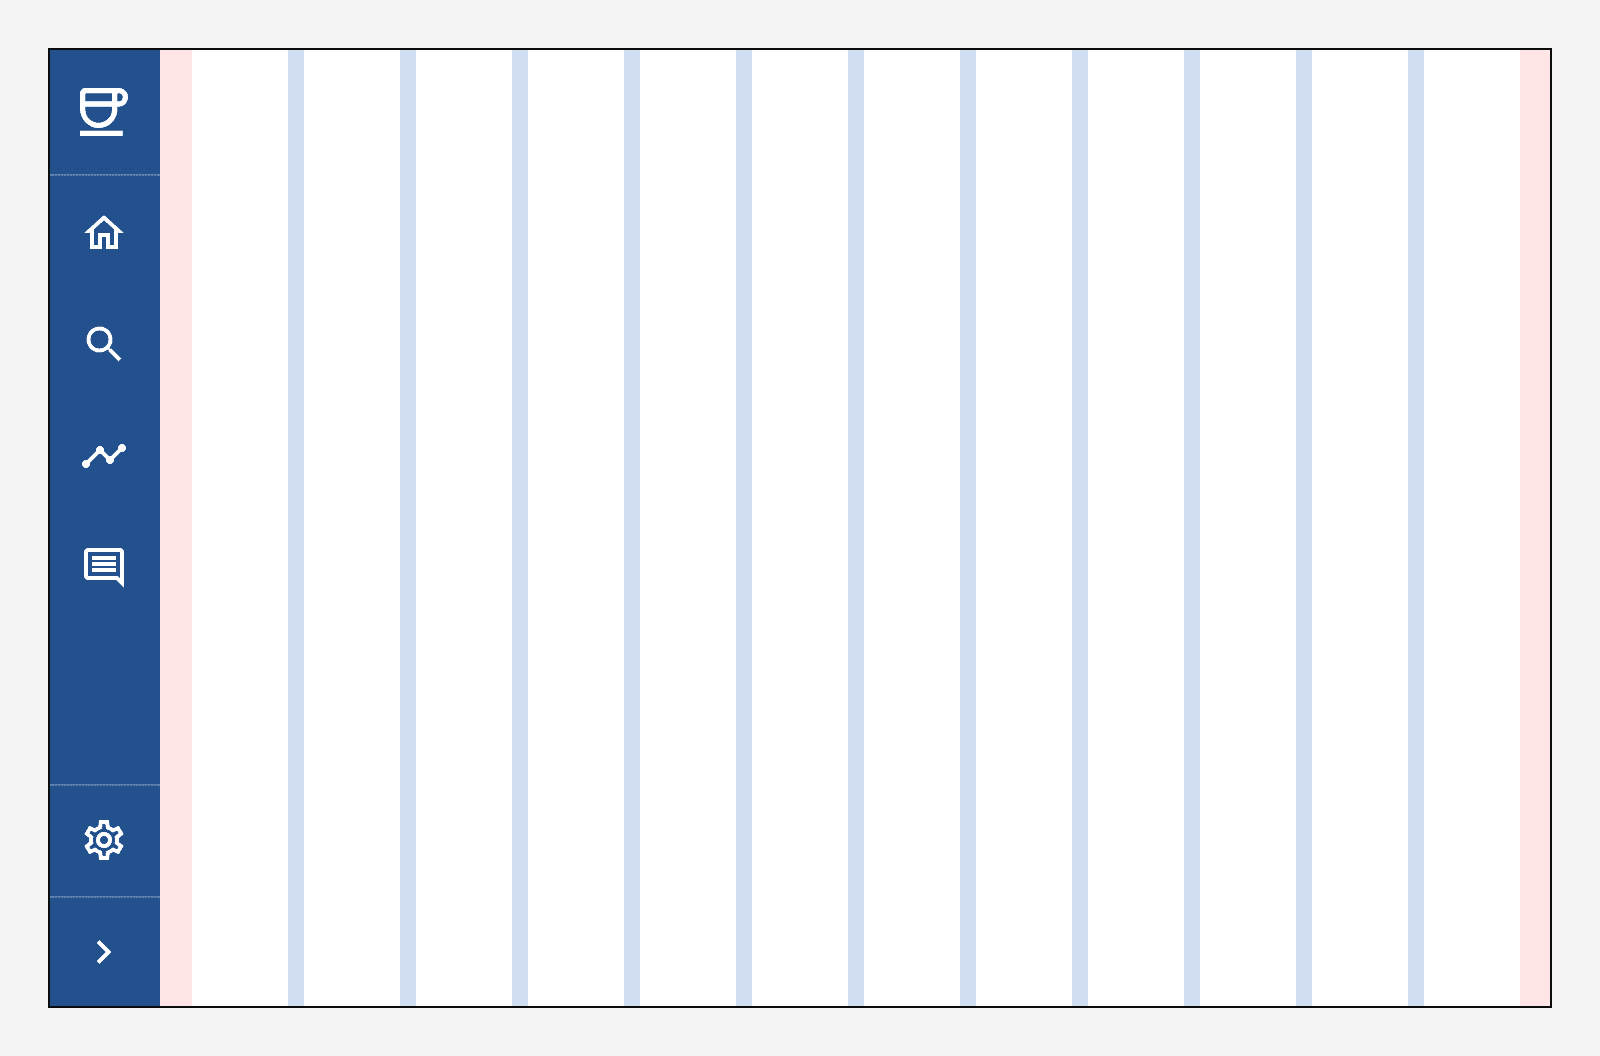 An example of a viewport with a side navigation on the left-hand side and a 12-column grid filling the remaining space on the right.